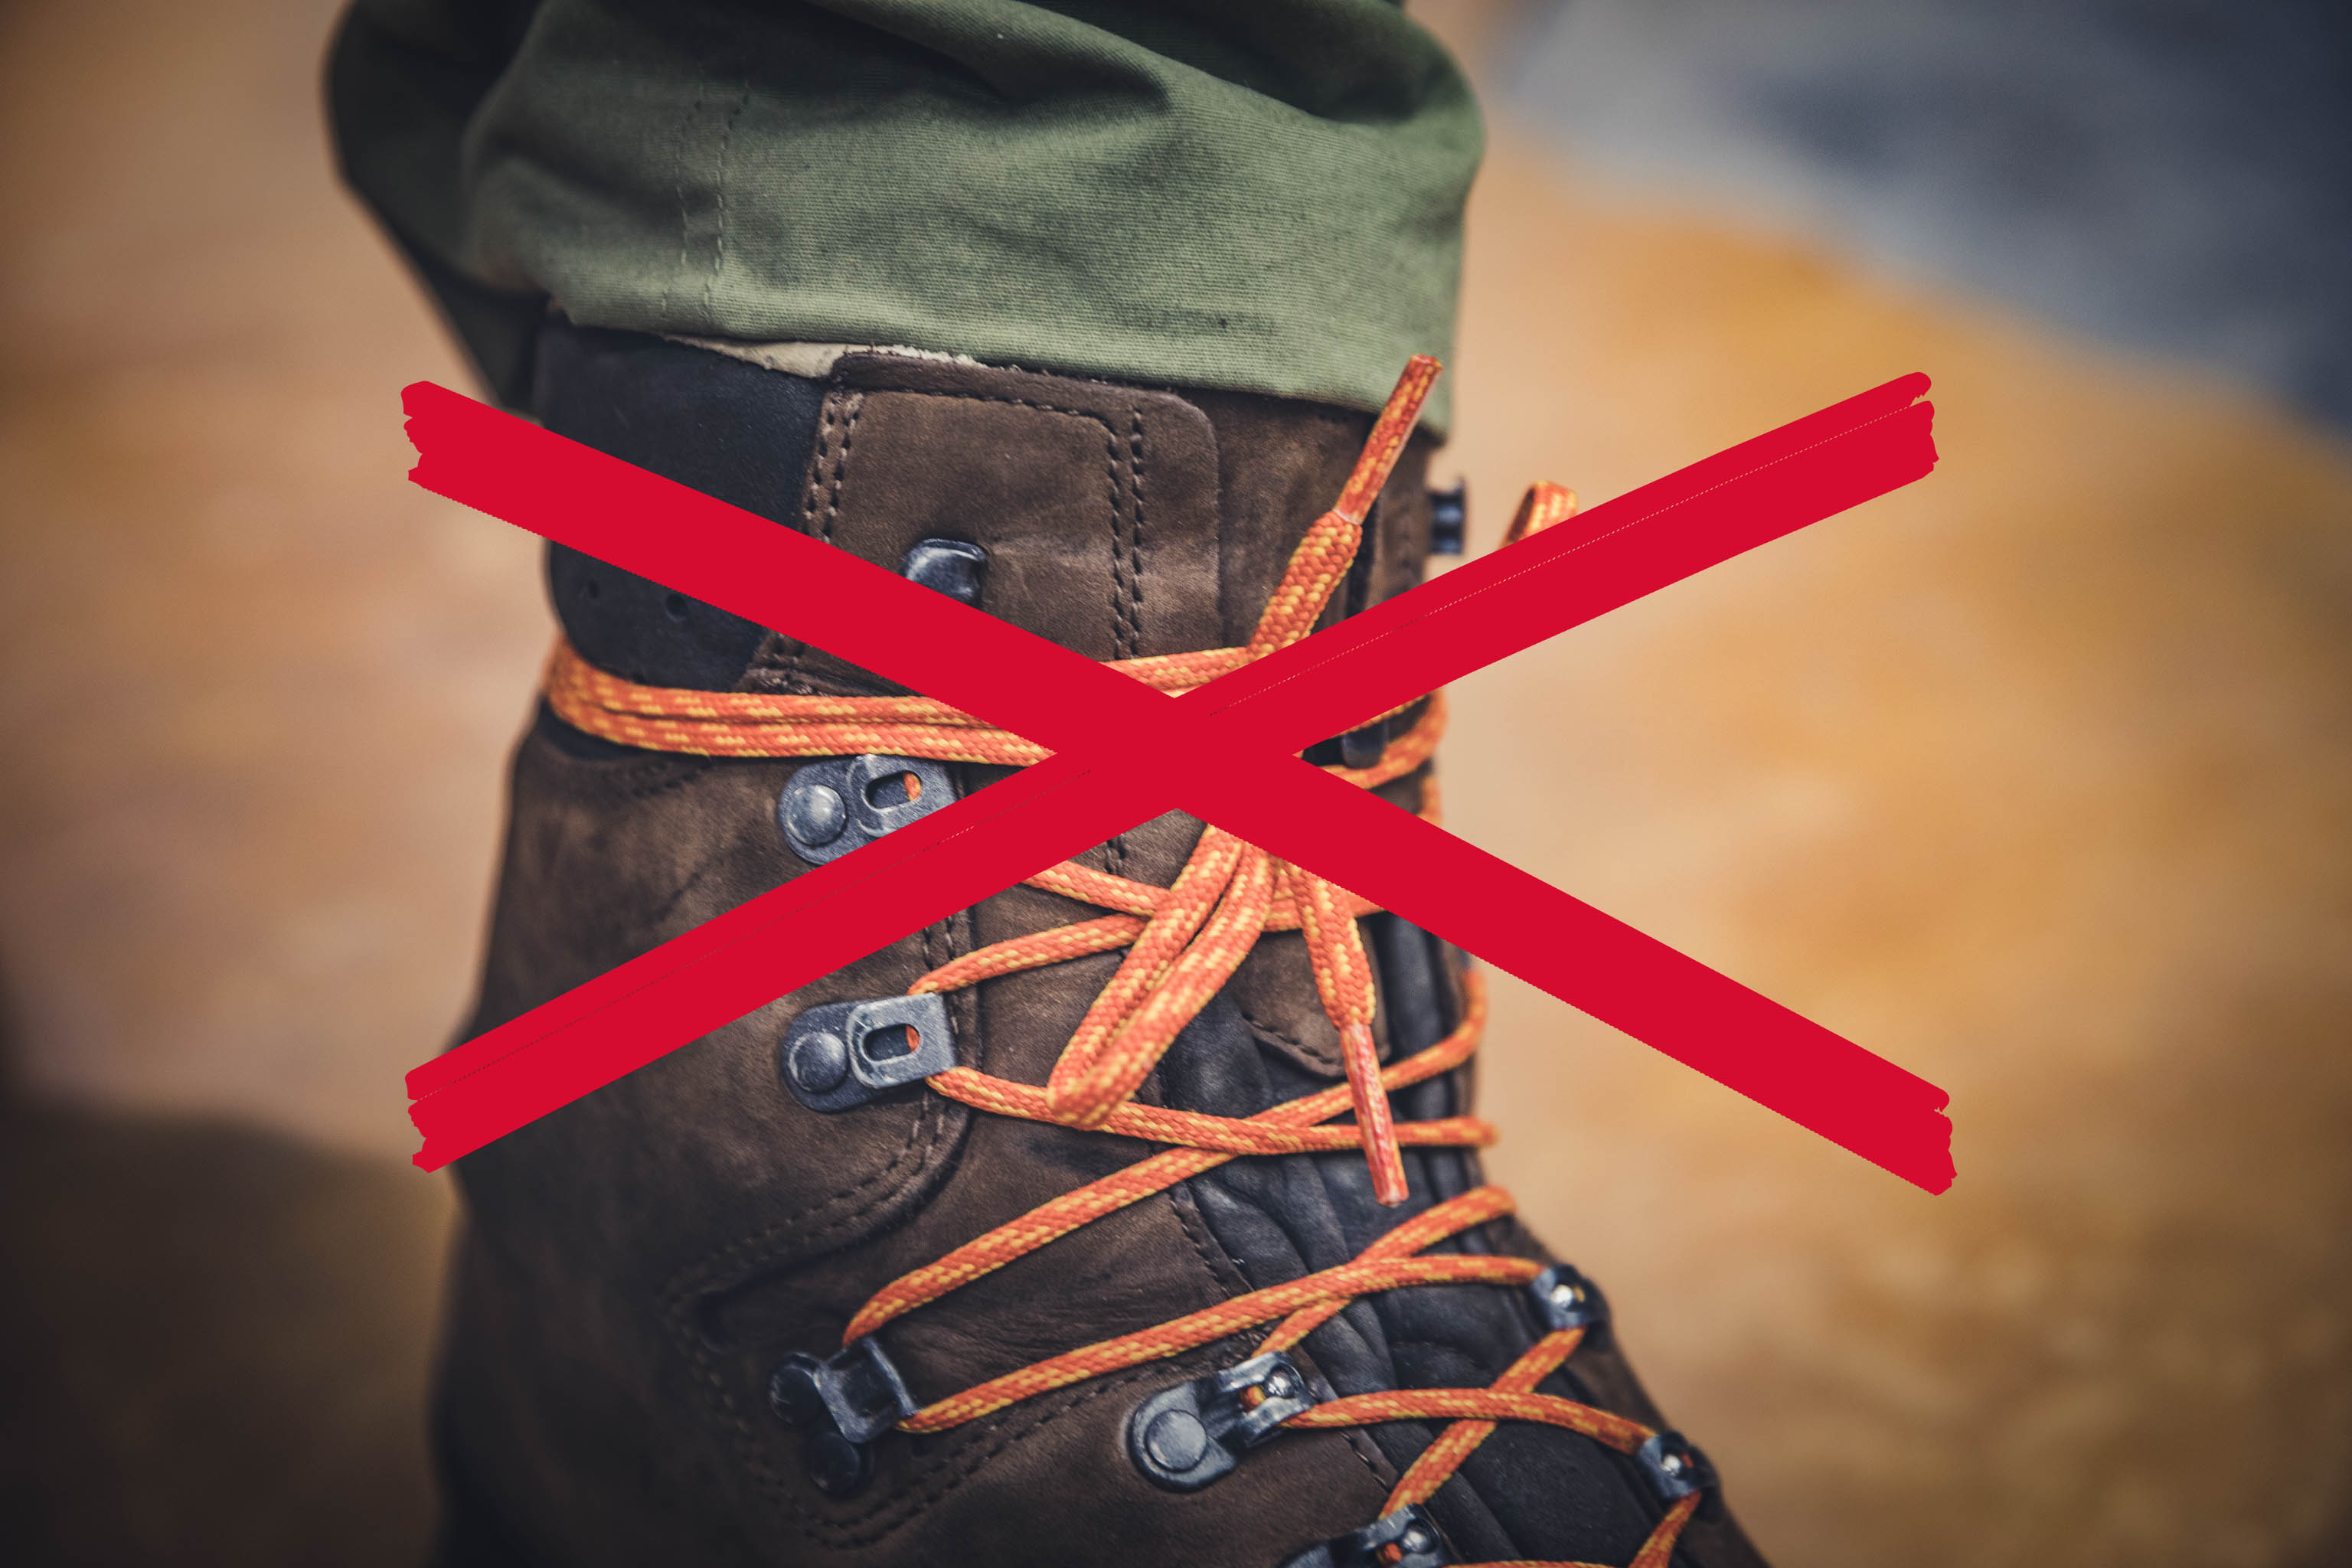 How to lace walking boots